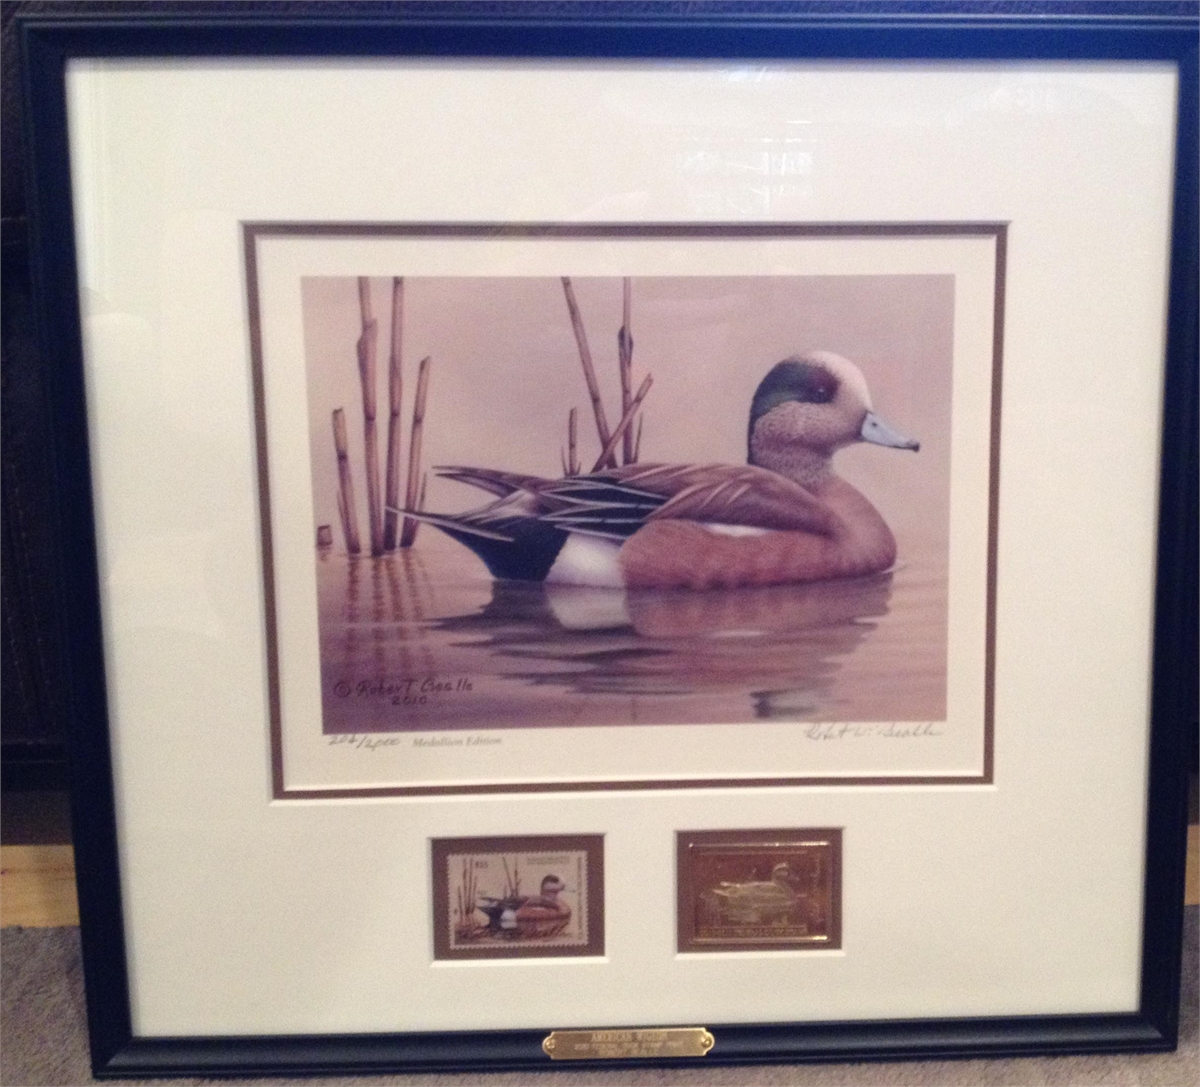 Three Gold Medallion Edition Federal Duck Stamp